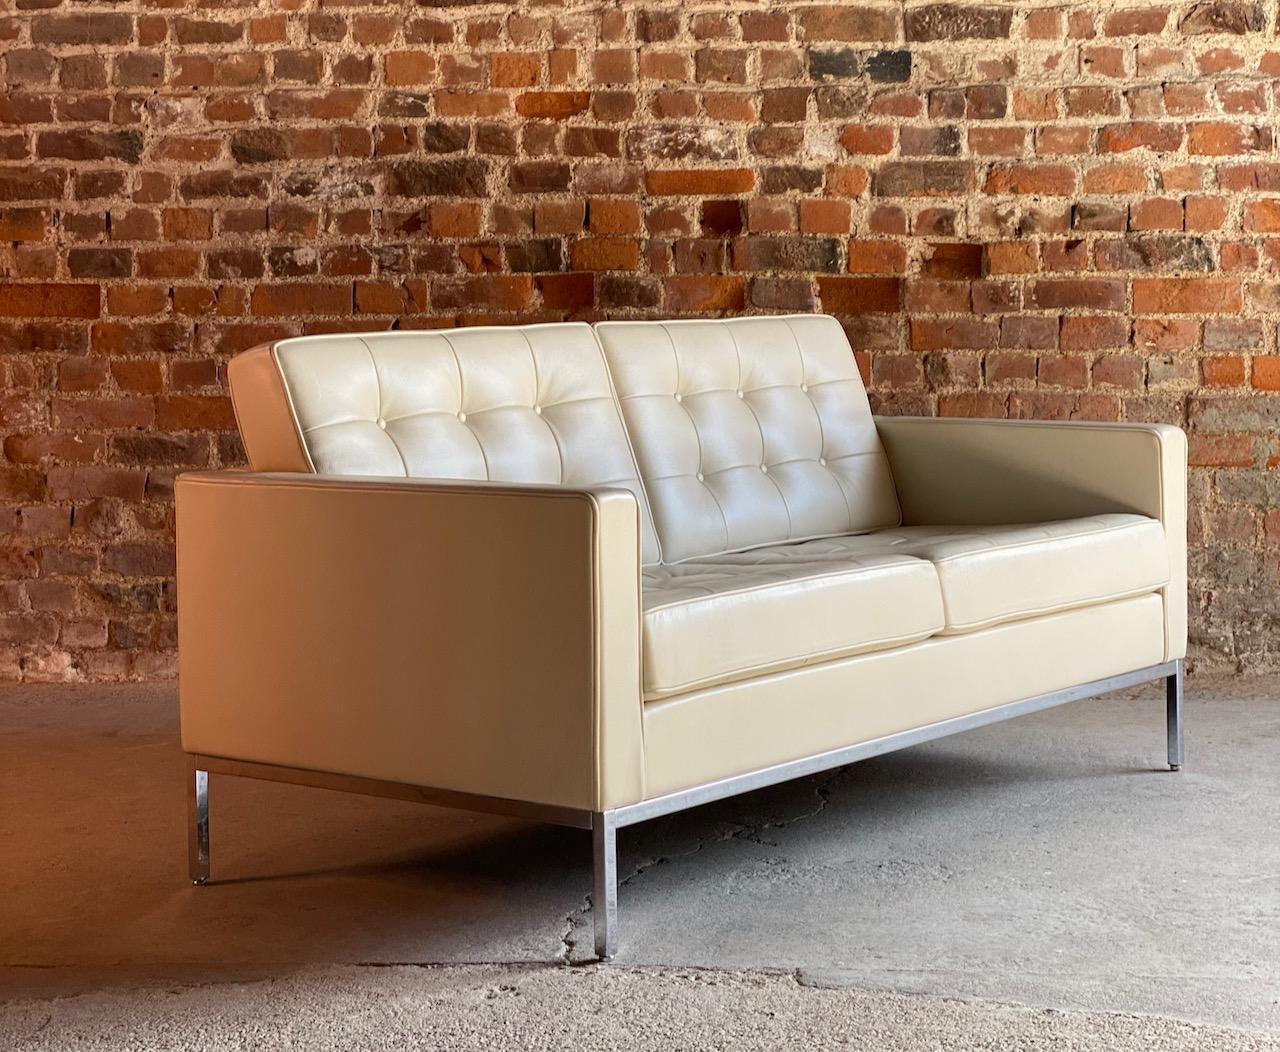 American Florence Knoll Leather Sofa by Knoll Studio